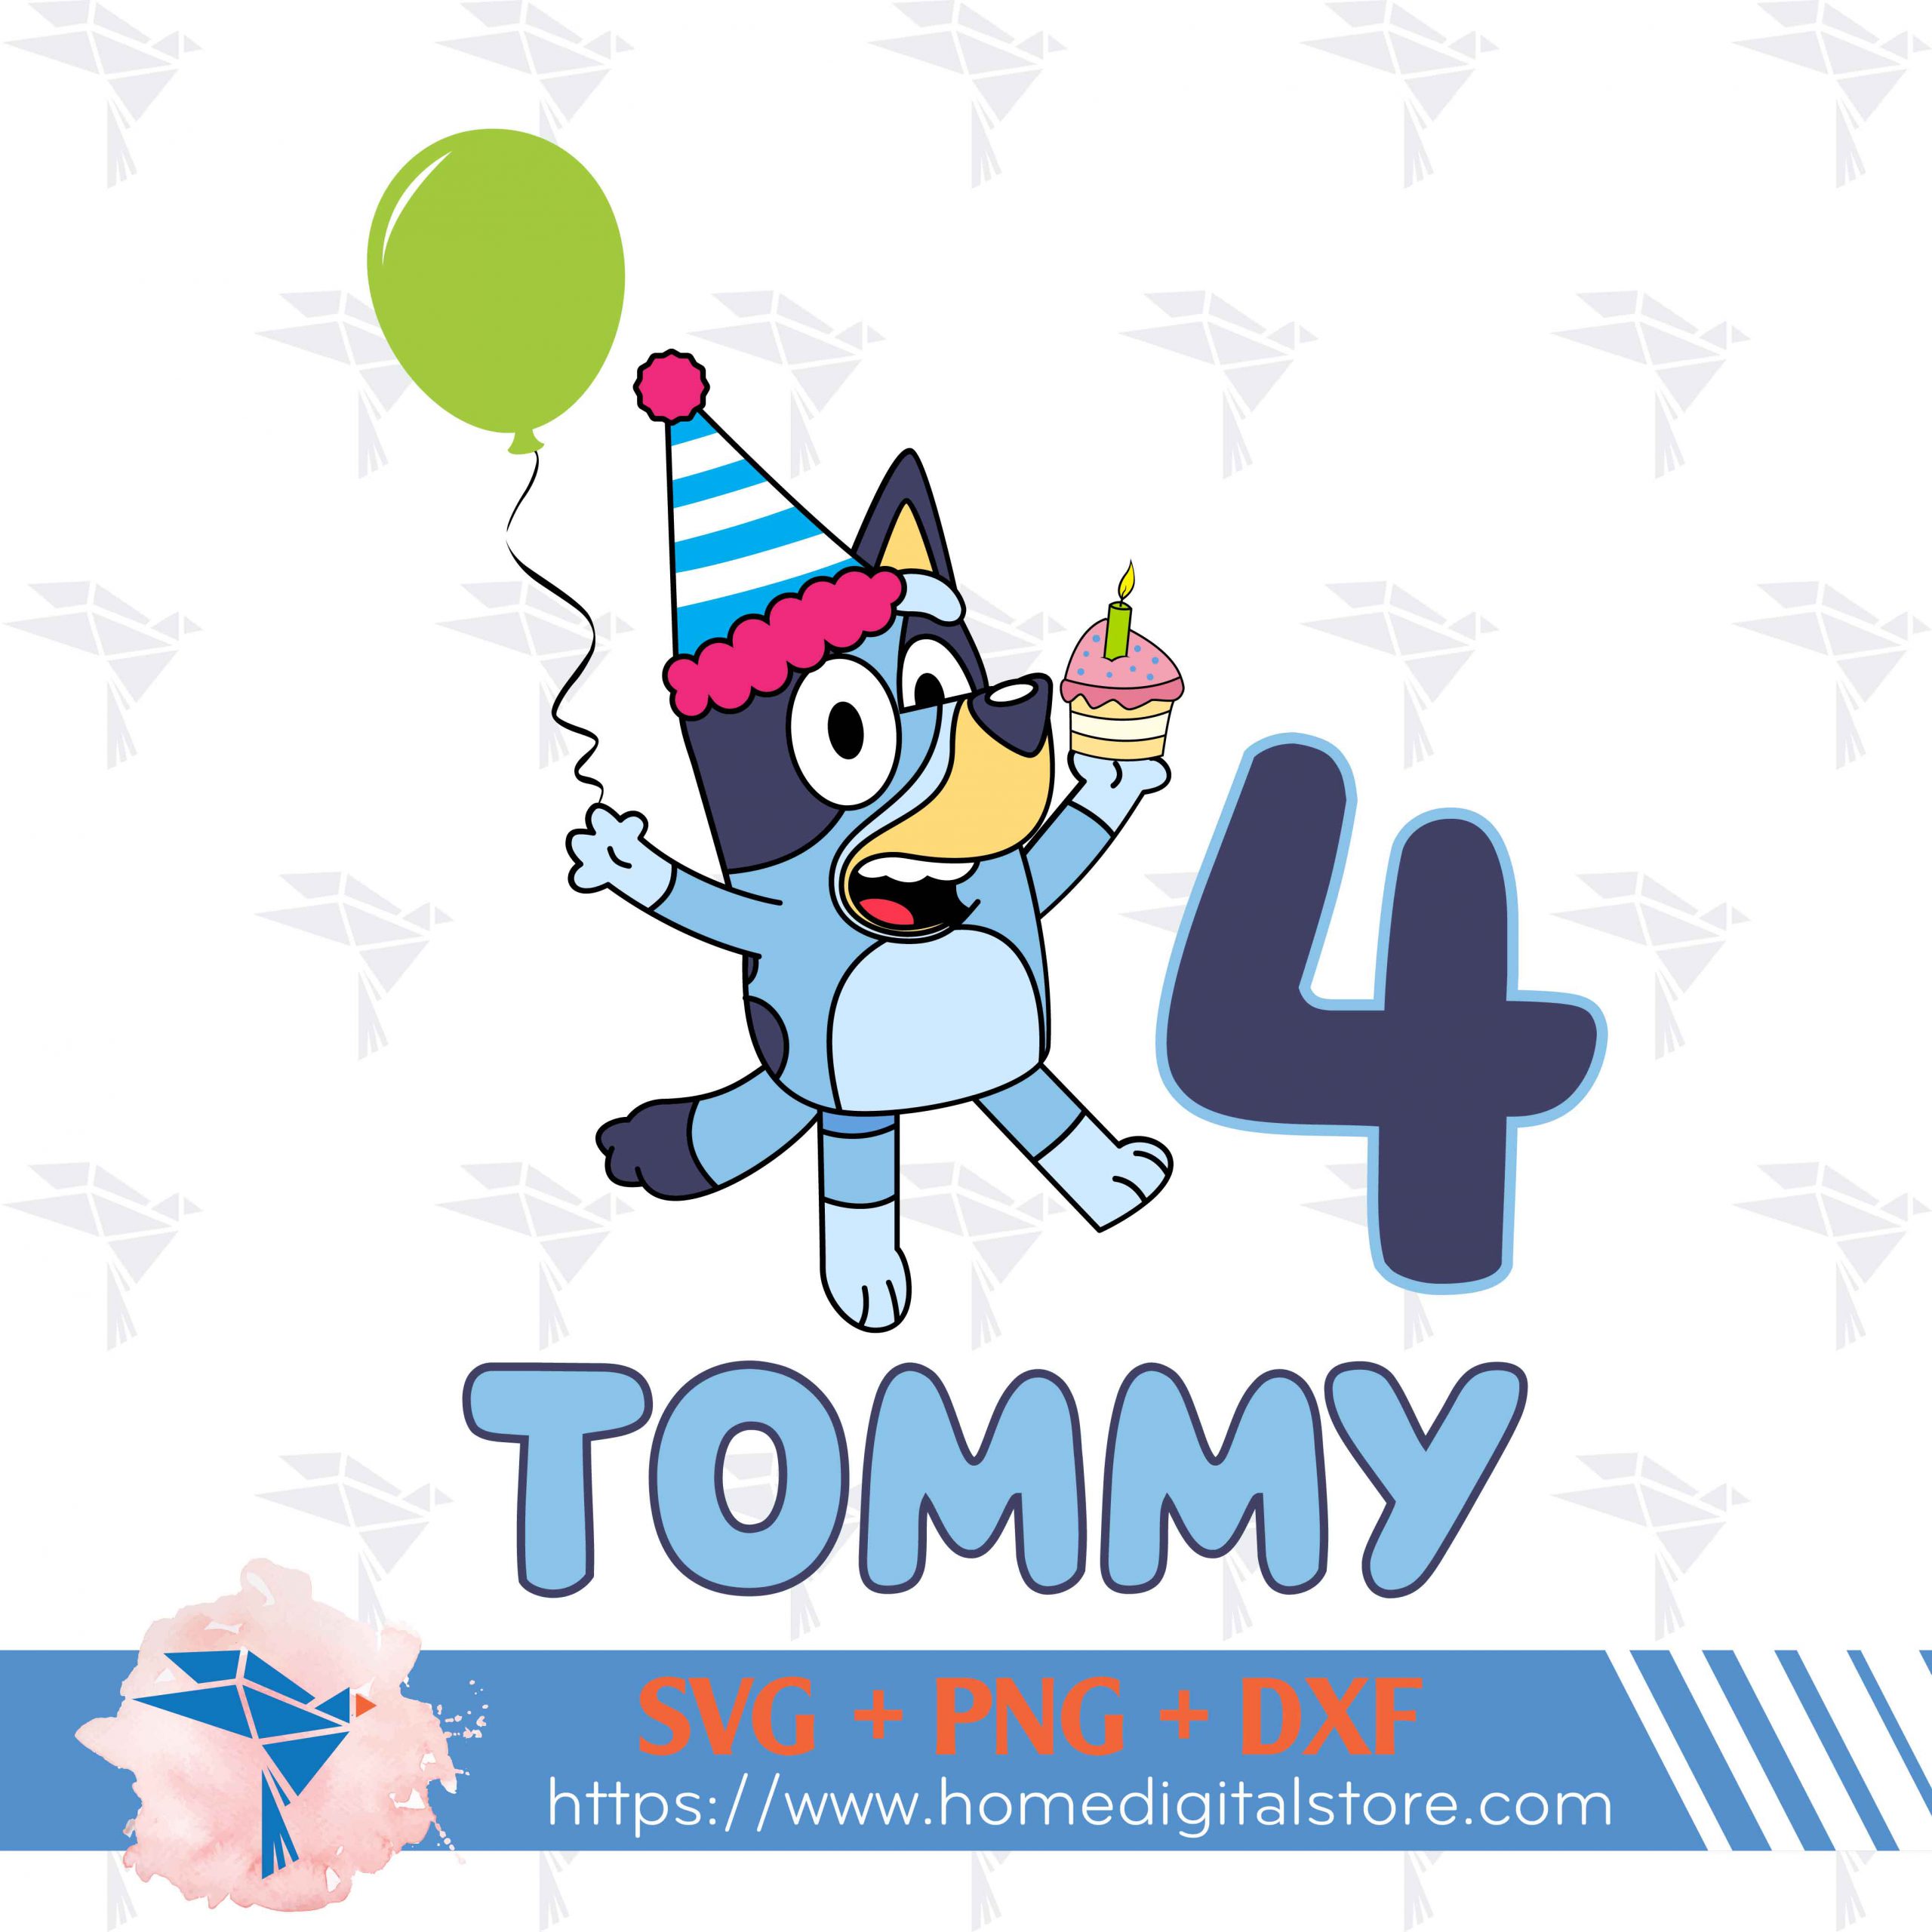 Bluey Birthday Customized Name SVG, PNG, DXF. Instant download files for  Cricut Design Space, Silhouette, Cutting, Printing, or more